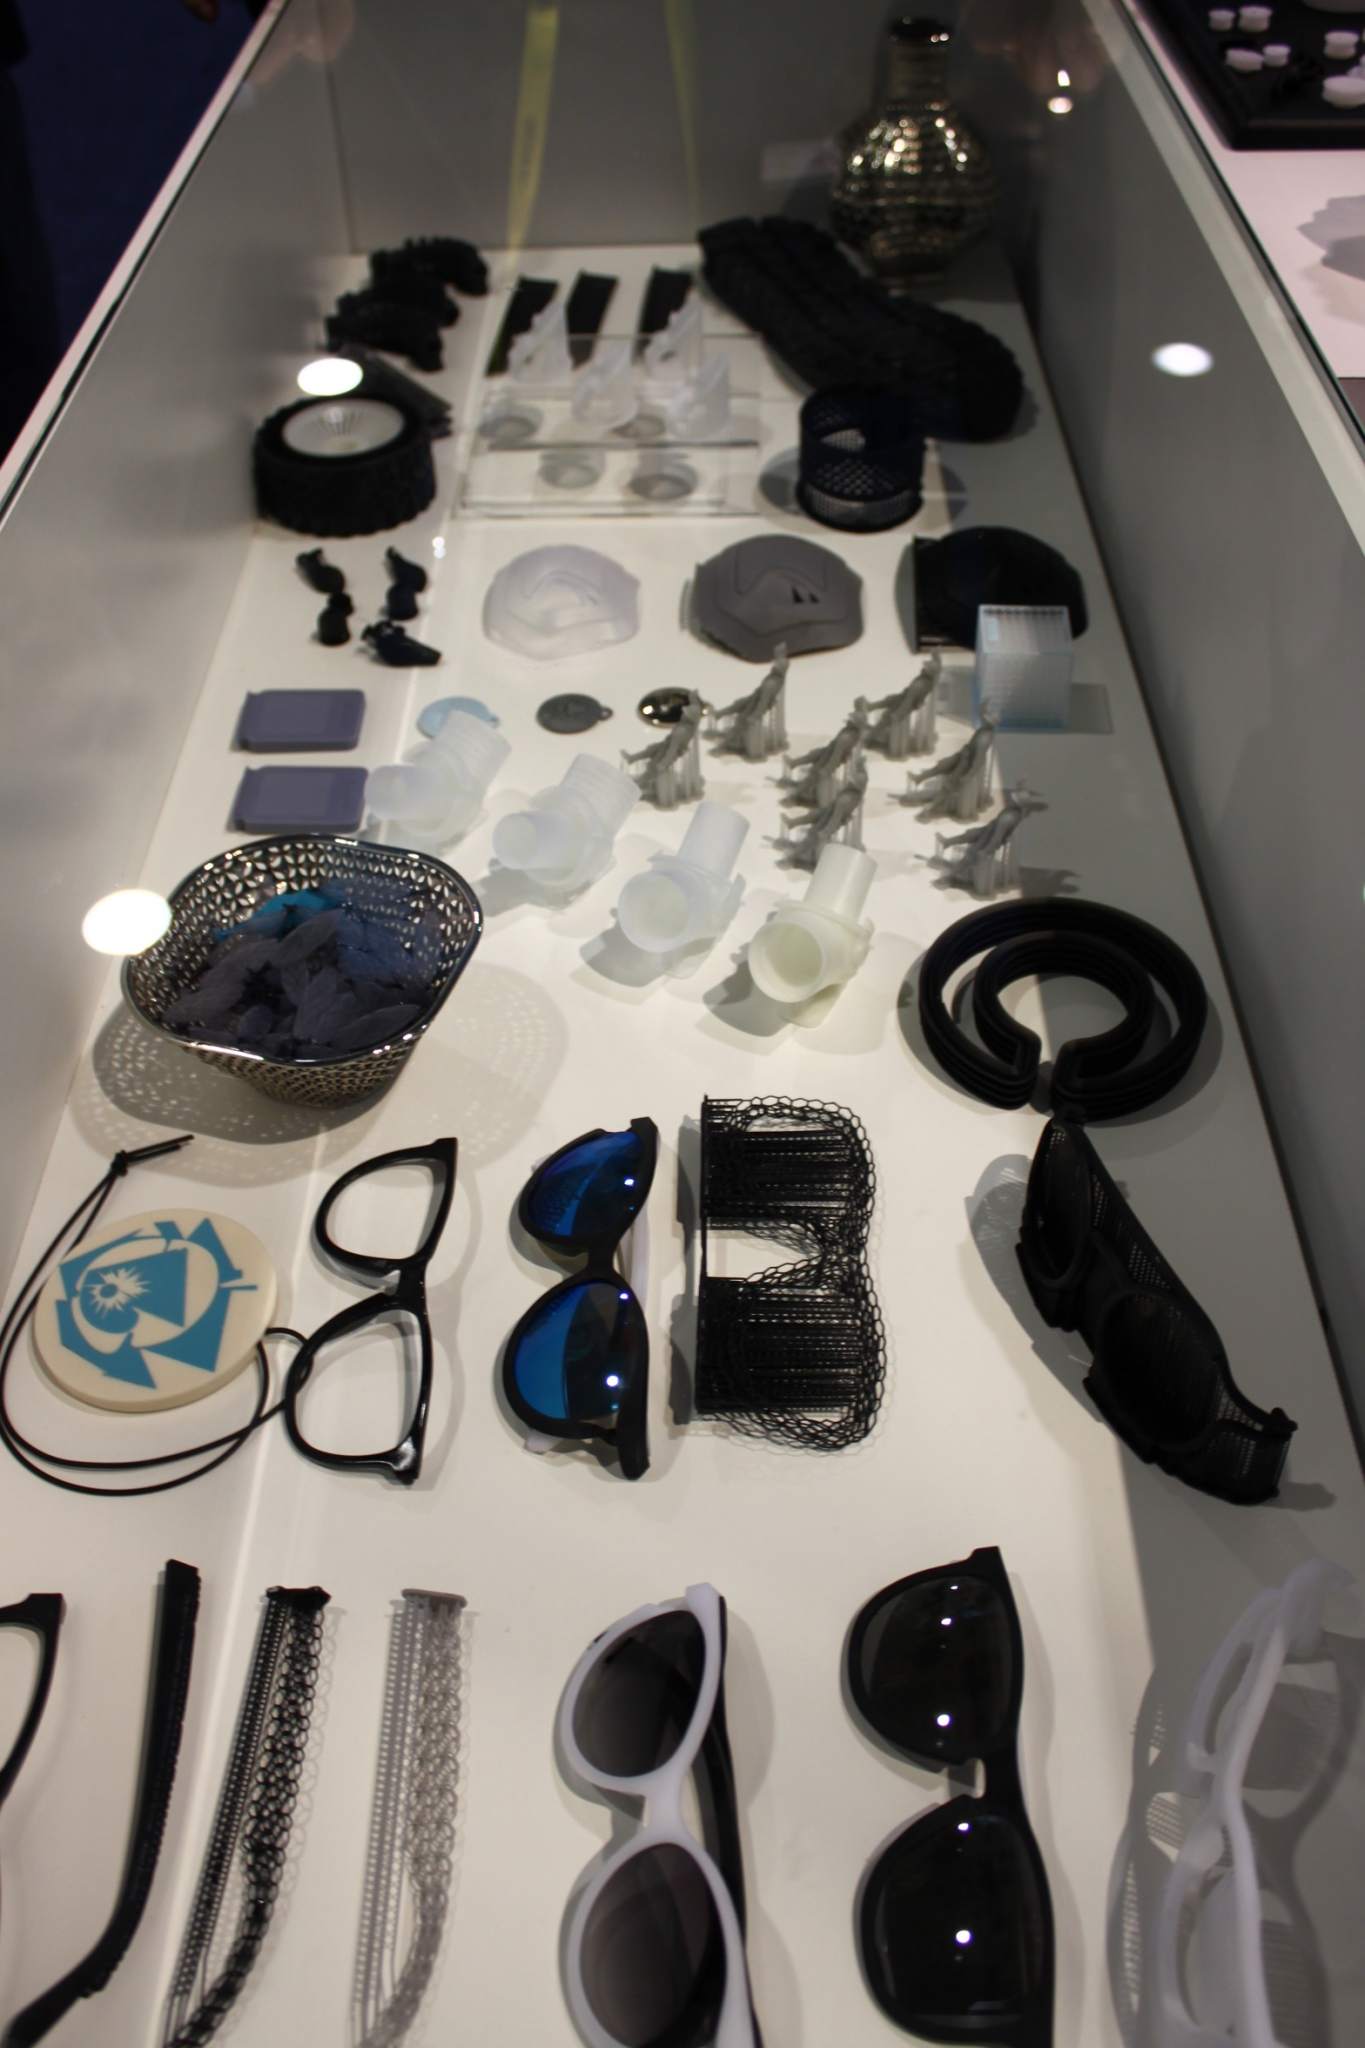 One of DWS's display cases featuring an array of 3D printed designs. Photo via DWS.